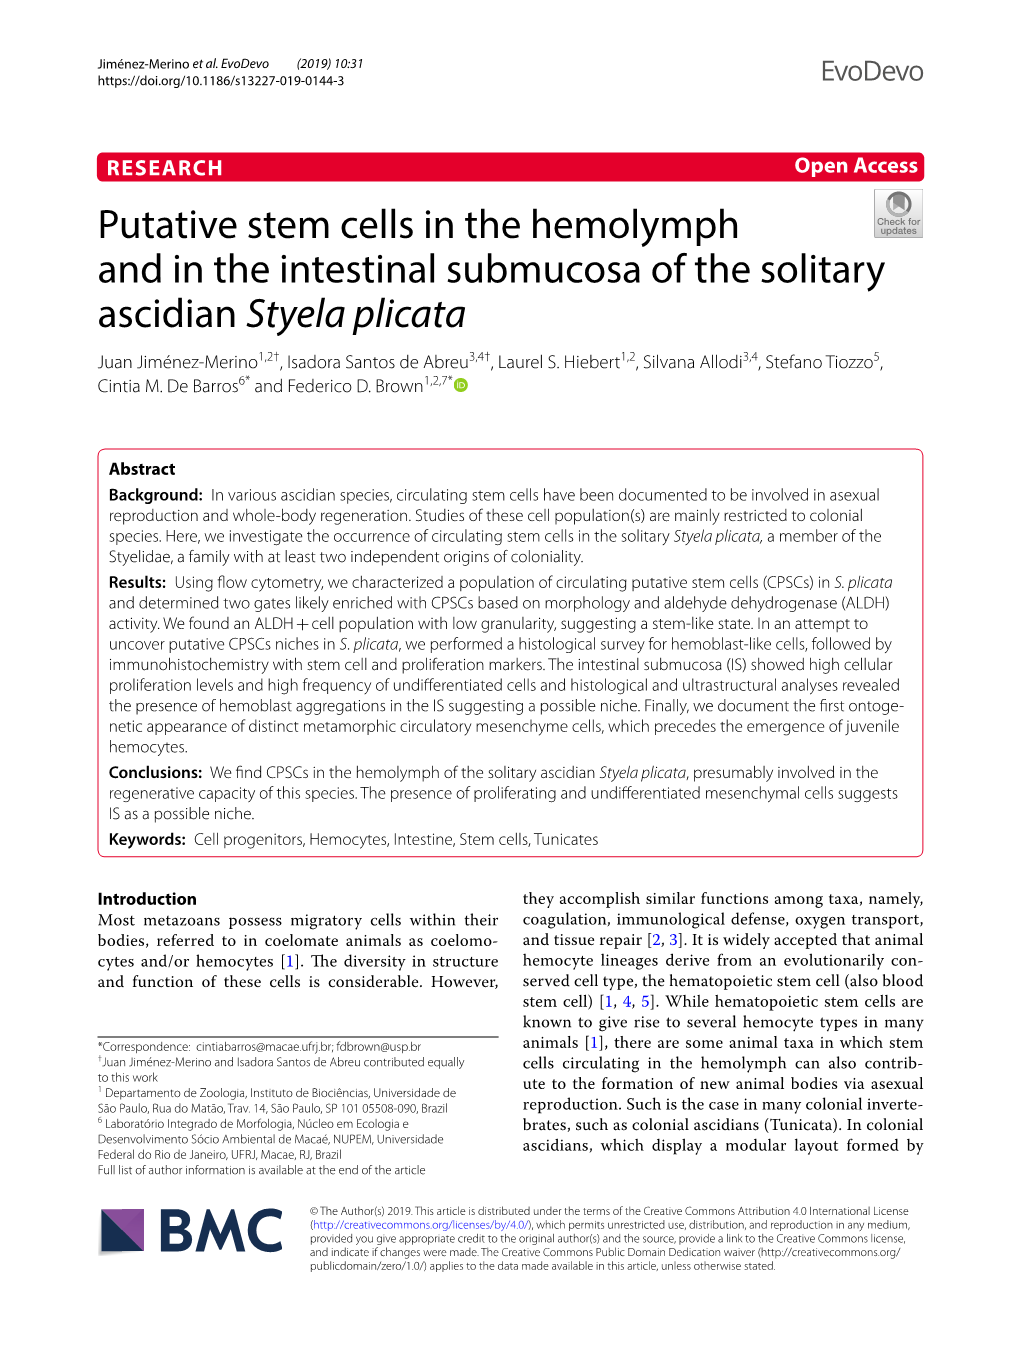 Putative Stem Cells in the Hemolymph and in the Intestinal Submucosa Of